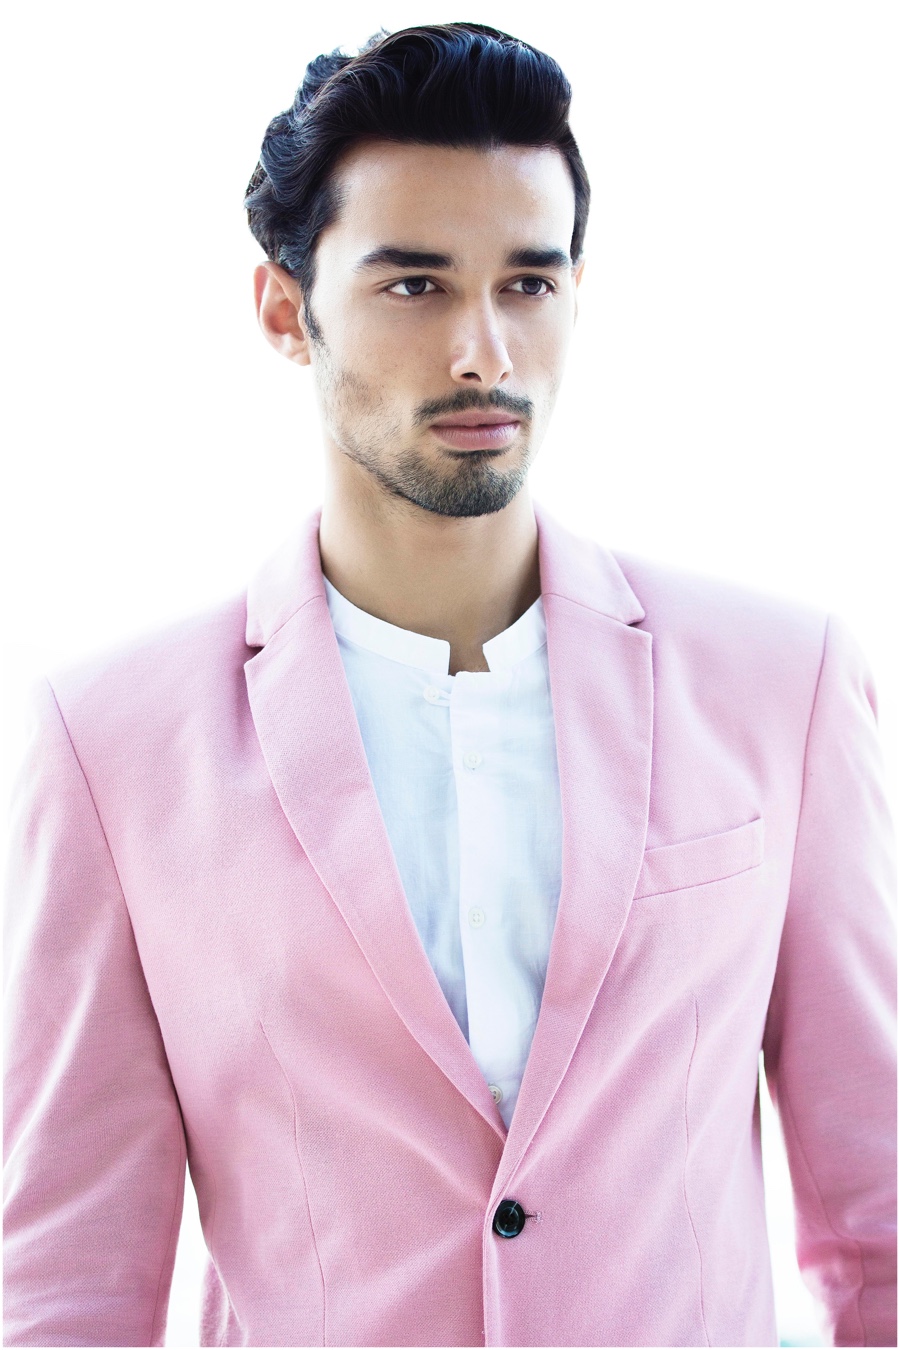 Manuel Stoilov is a Spring Vision in Alex Jackson Shoot